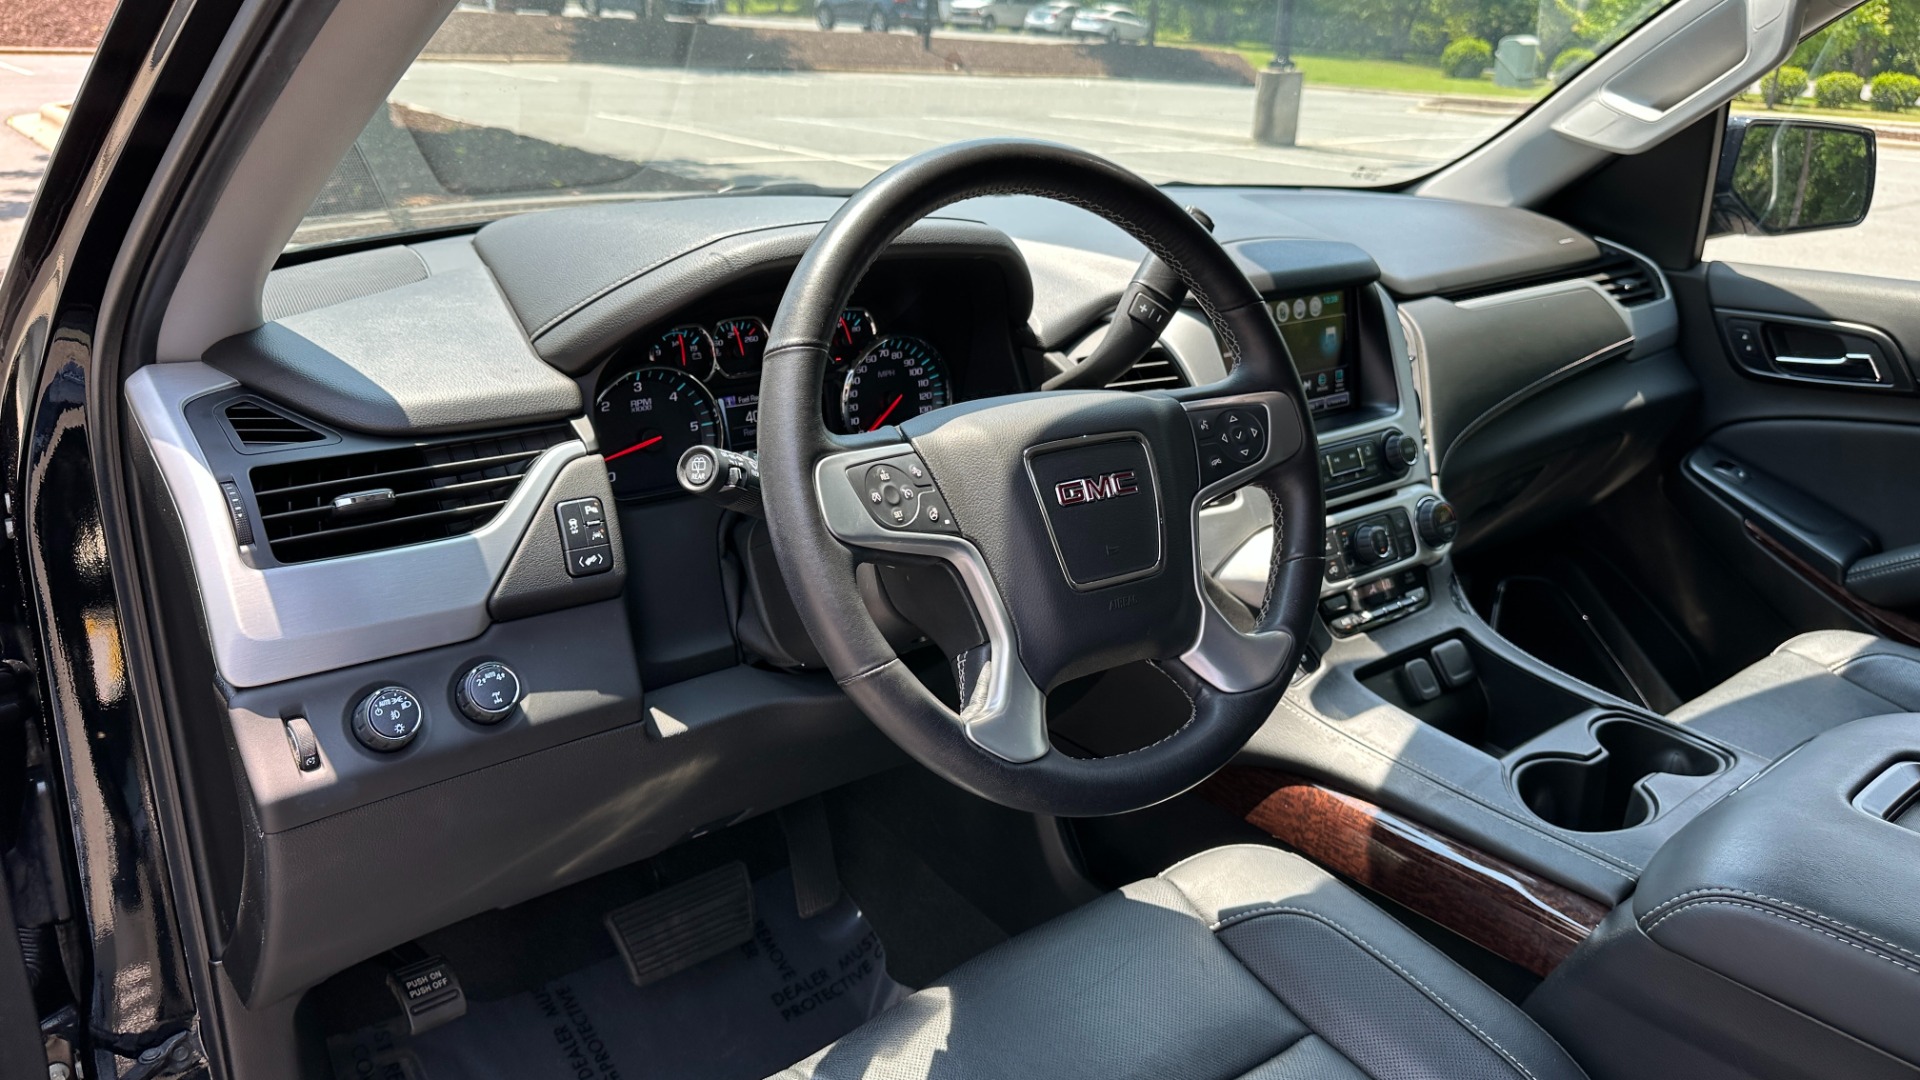 Used 2020 GMC Yukon SLT / OPEN ROAD PKG / CAPTAIN CHAIRS / CHROME GRILLE / POLISHED WHEELS for sale $47,695 at Formula Imports in Charlotte NC 28227 11